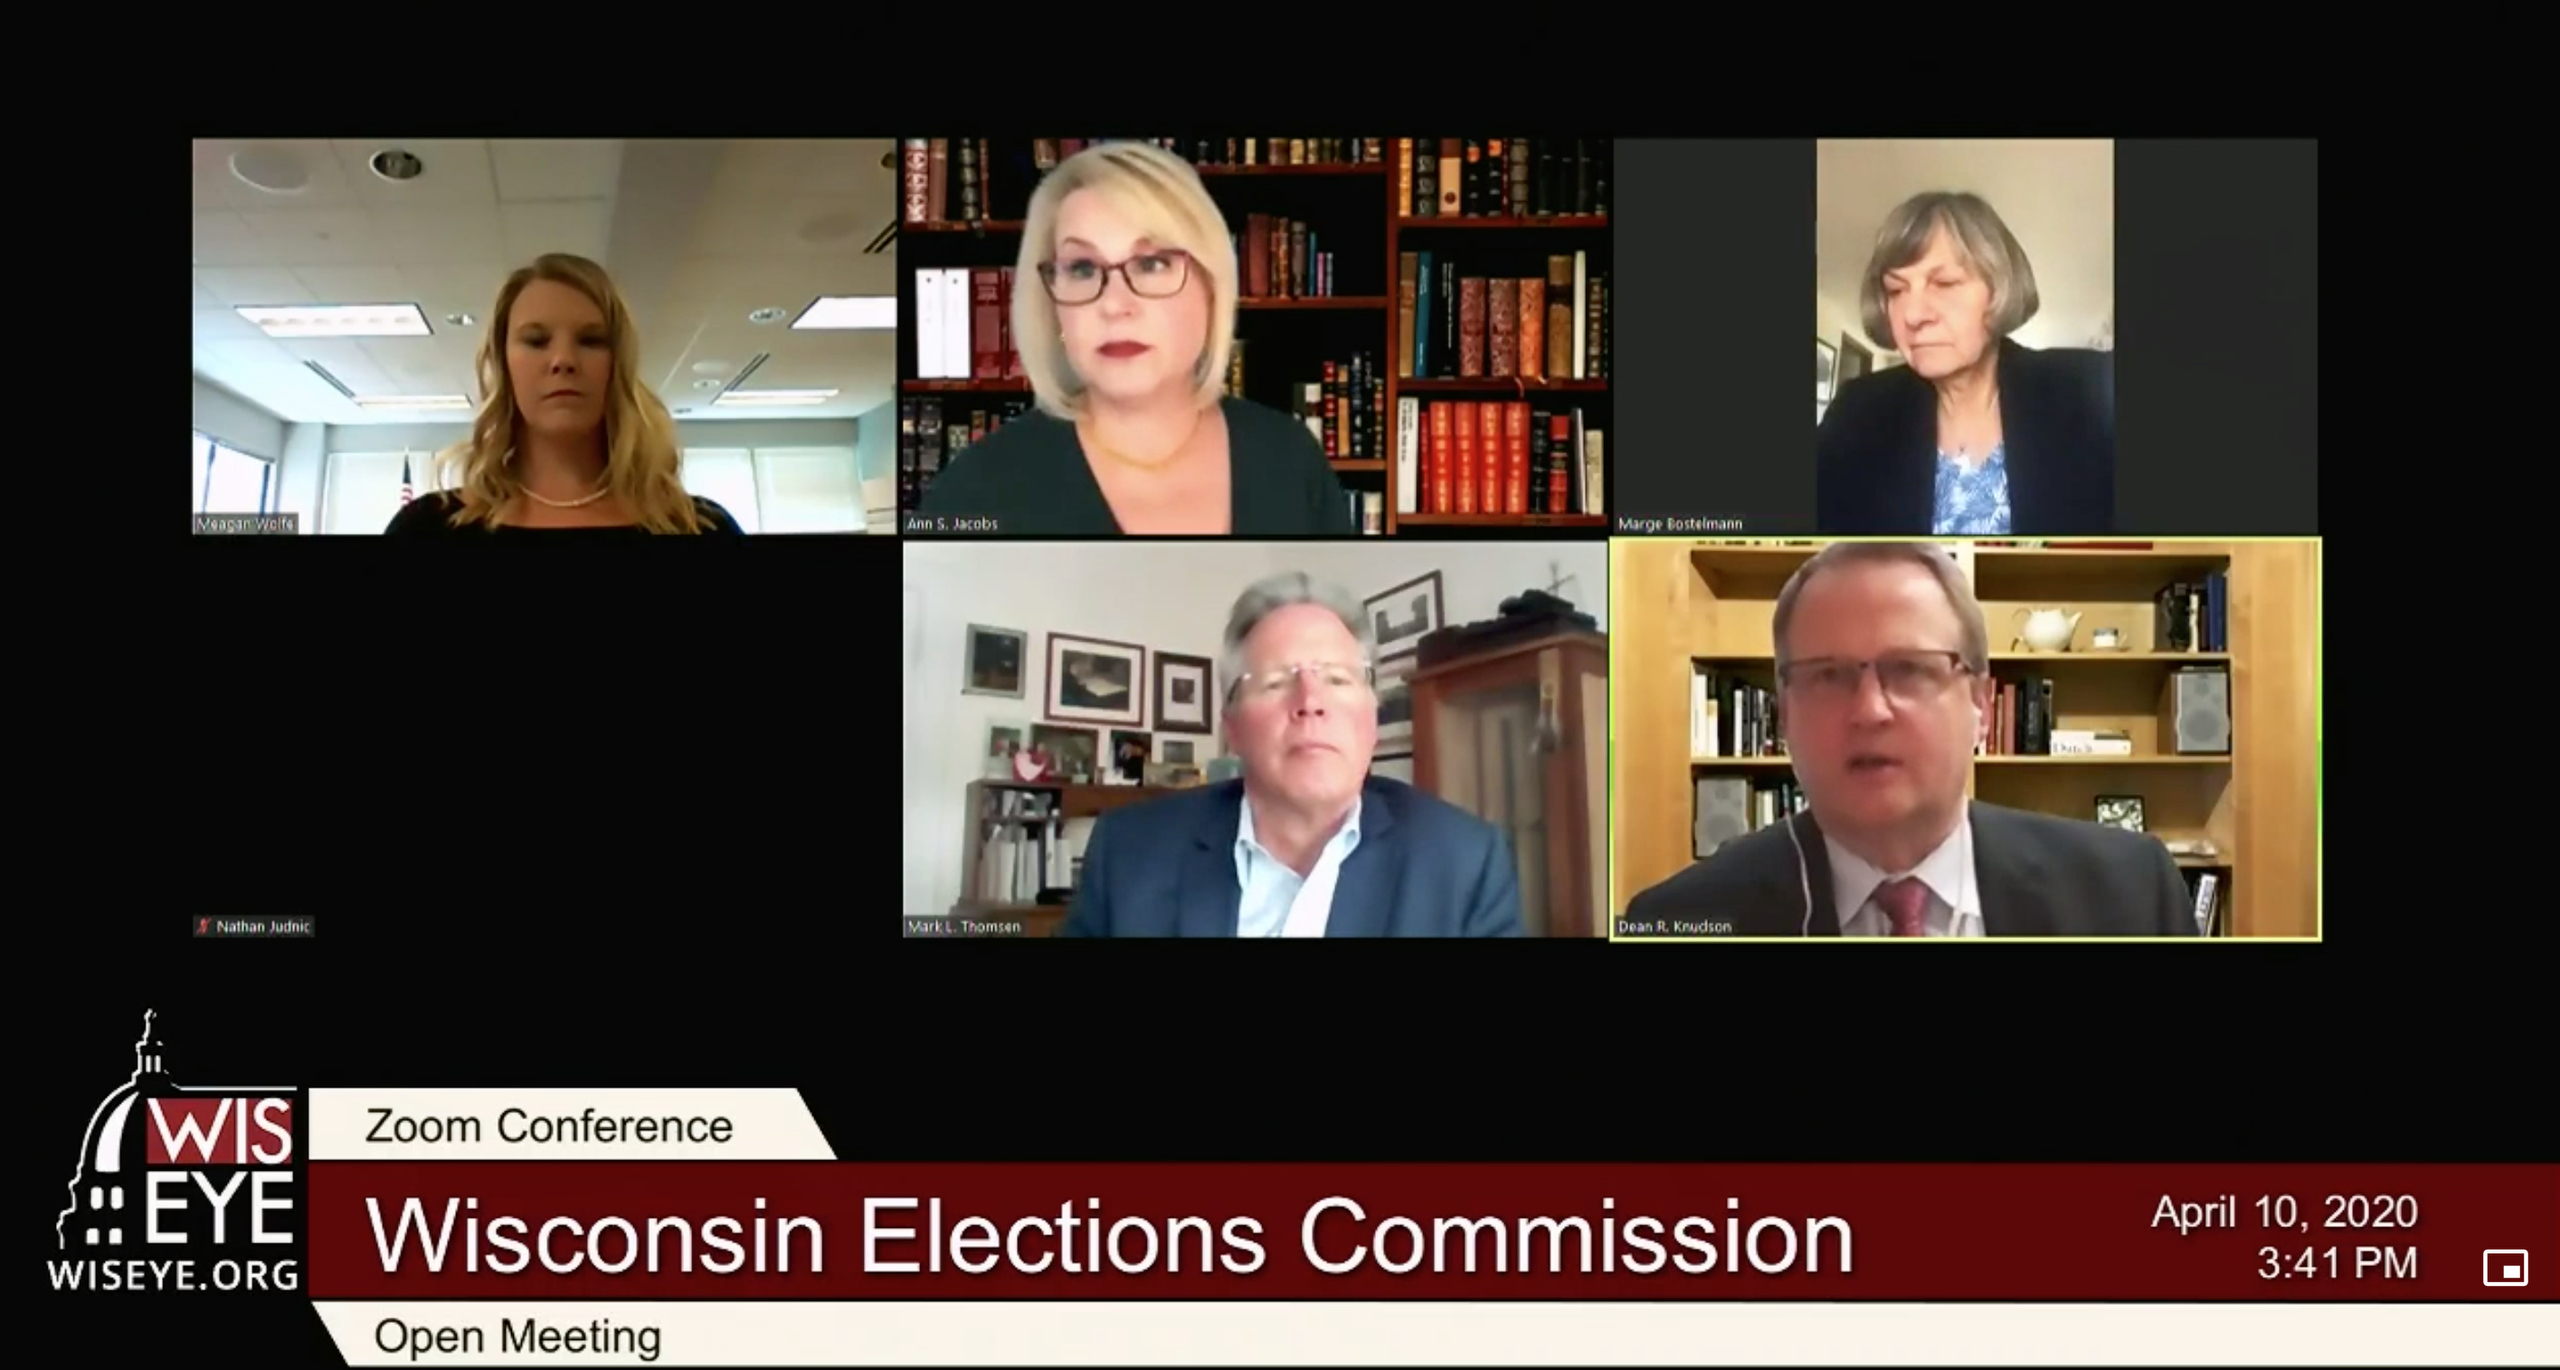 Members of the Wisconsin Elections Commission appear in a teleconference meeting on April 10, 2020.